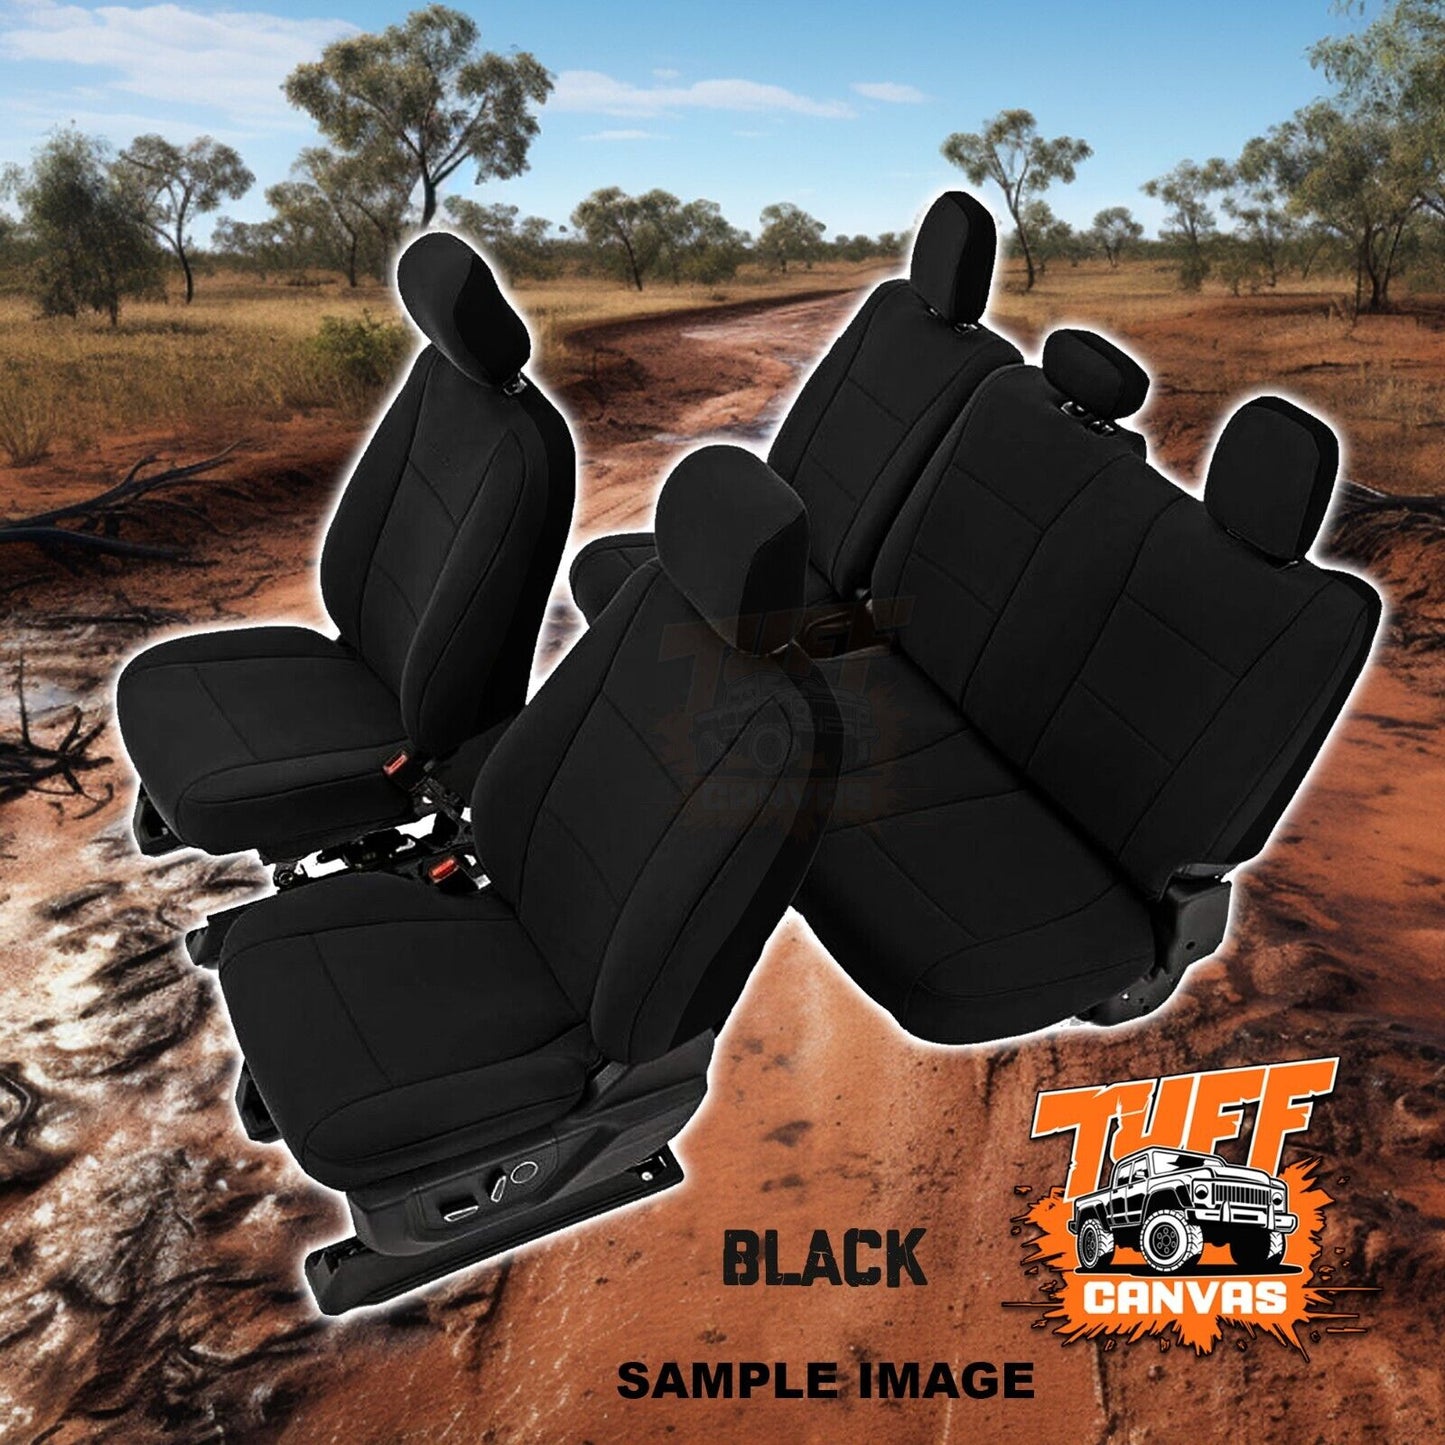 Black Tuff Canvas S2 Seat Covers 2 Rows For Toyota Hilux 150 SR5 SR Dual Cab 5/2005-2015